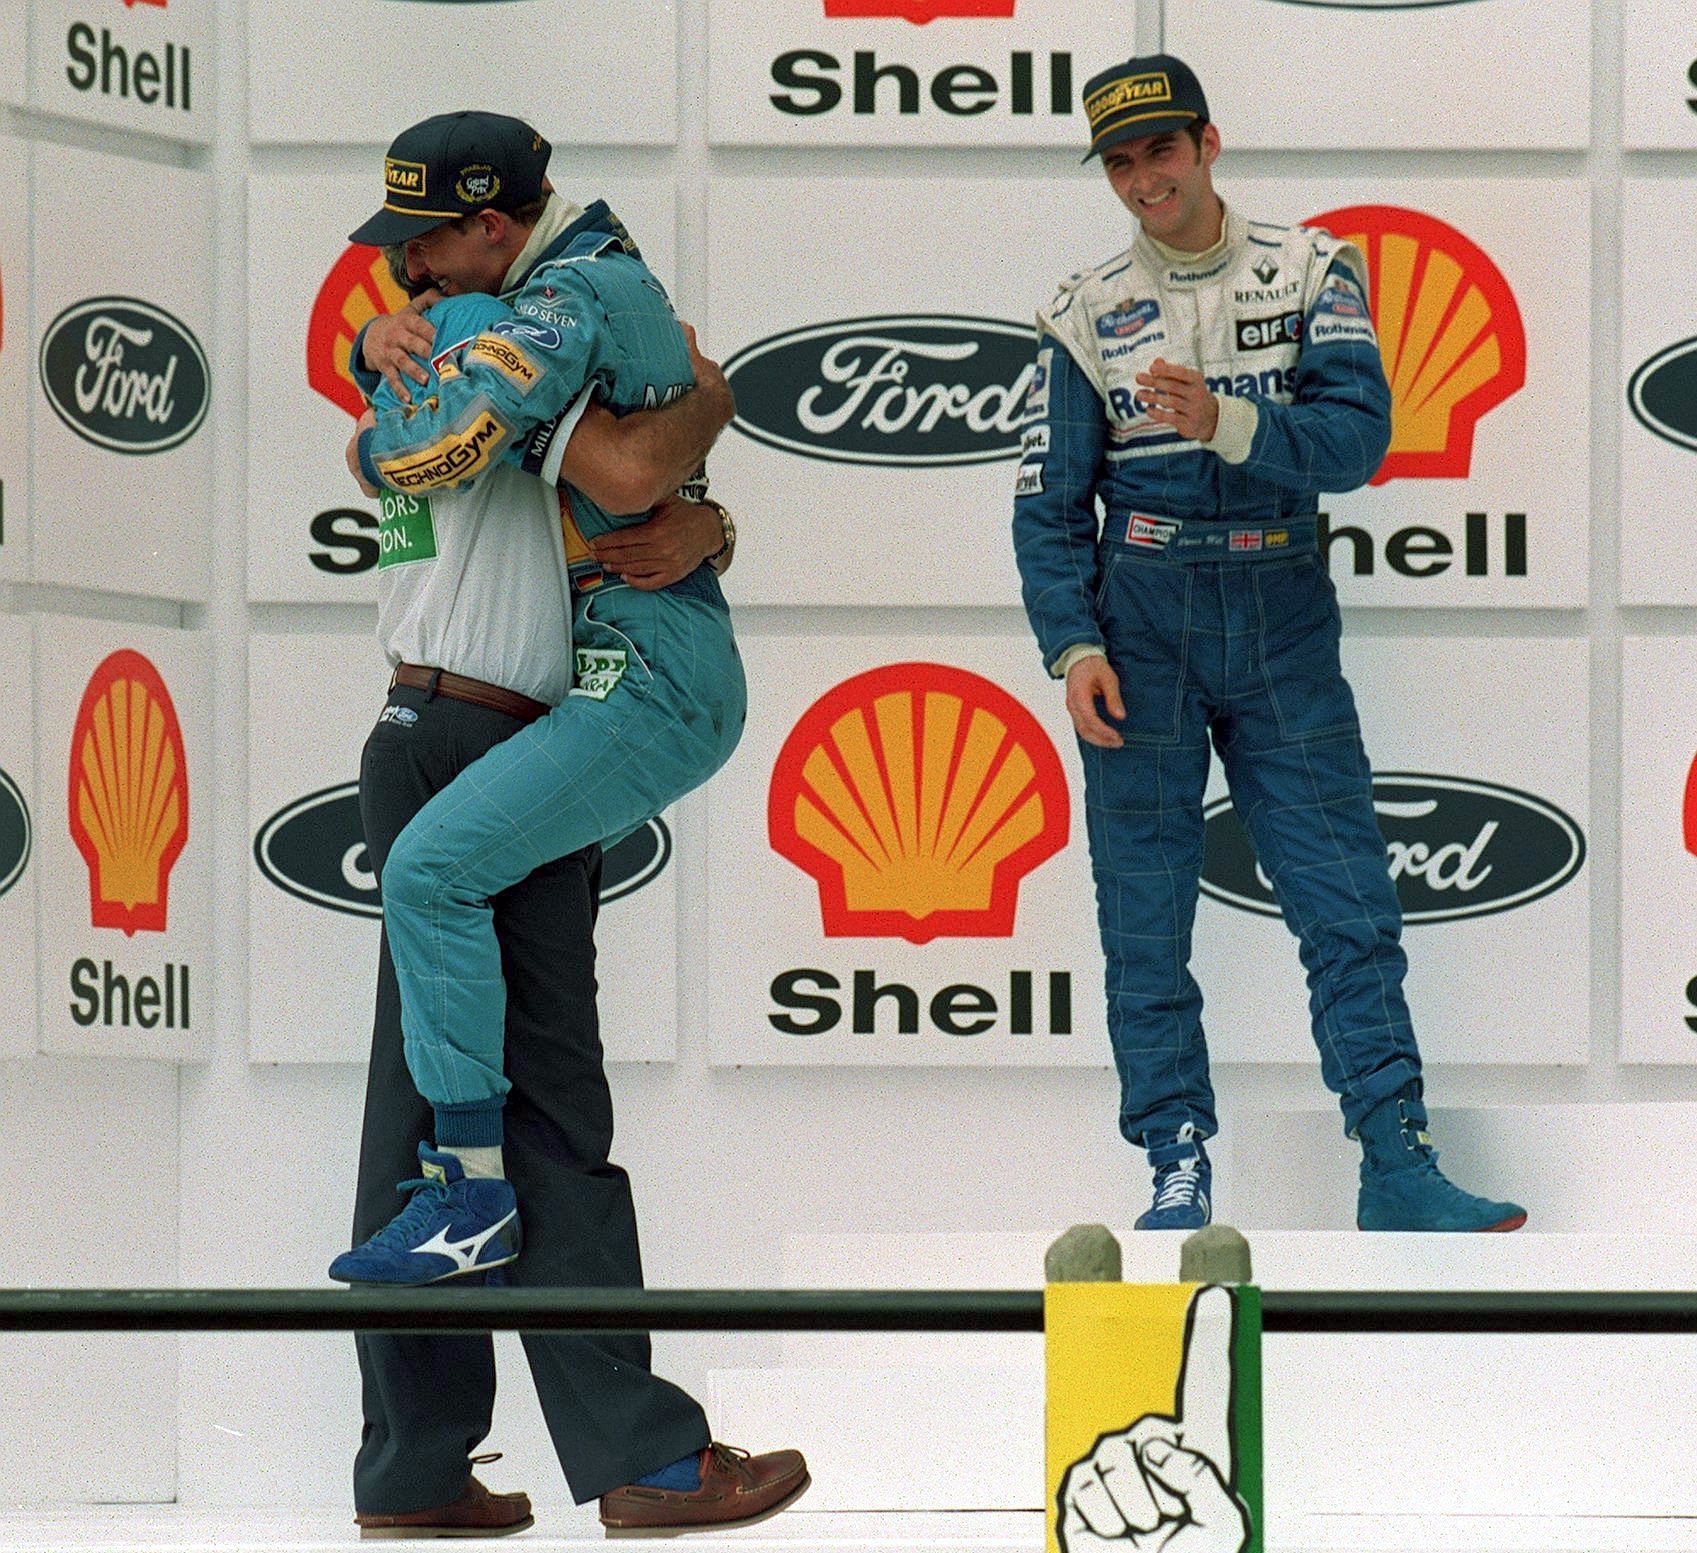 Michael Schumacher&#039;s title in 1994 did come under the scanner because of the circumstances.